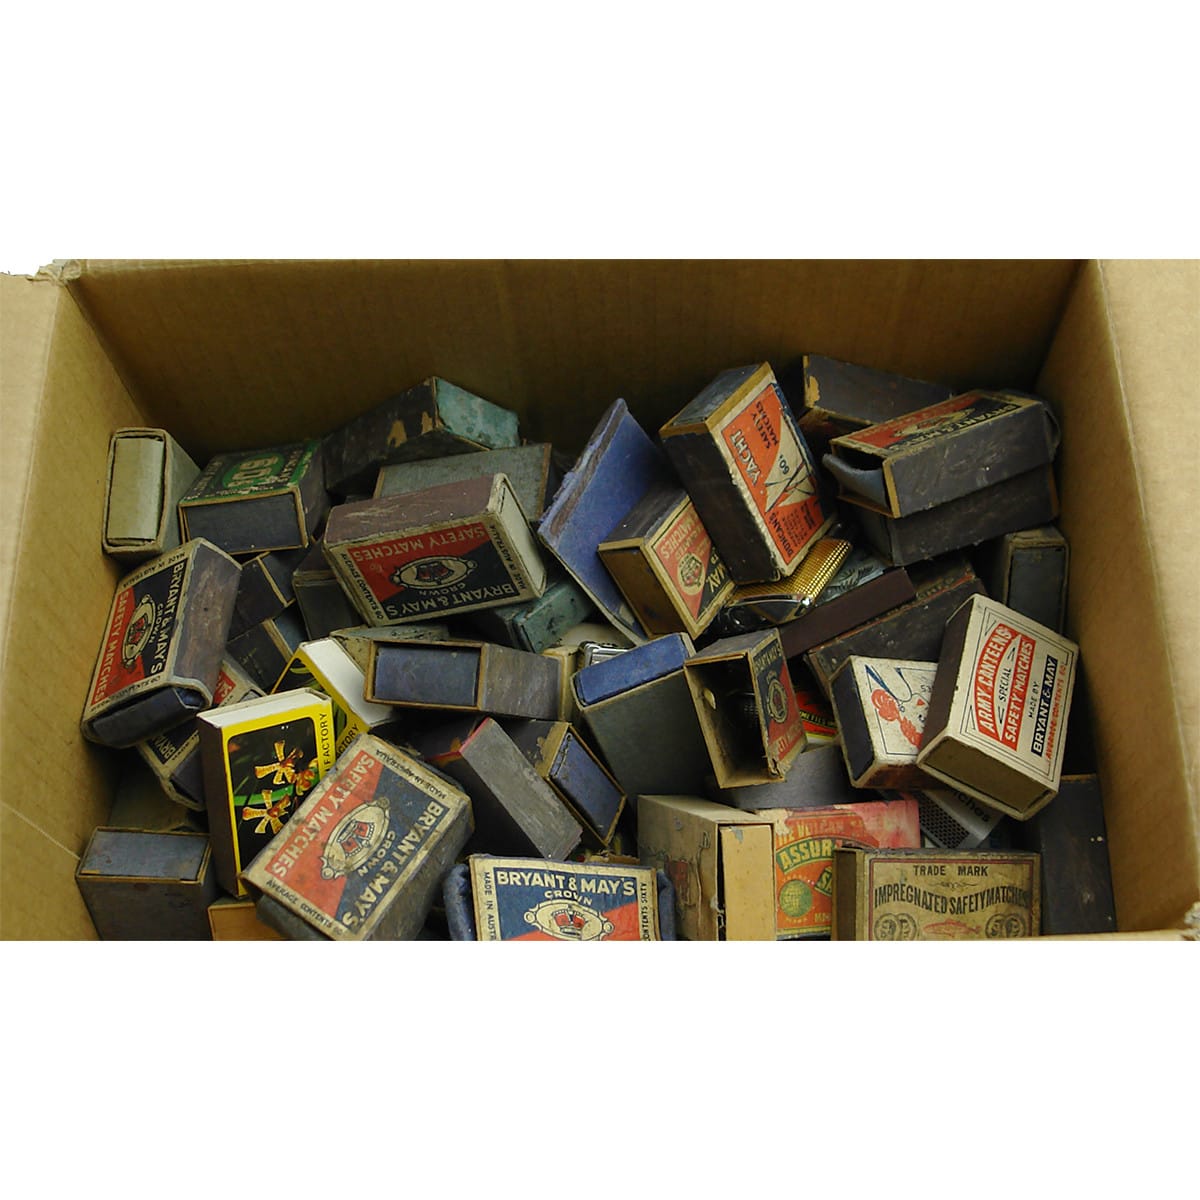 Box of Matchboxes and matchbox labels. Lots of early ones right through to later advertising ones. A couple of lighters and a Buchan souvenir matchbox holder too.